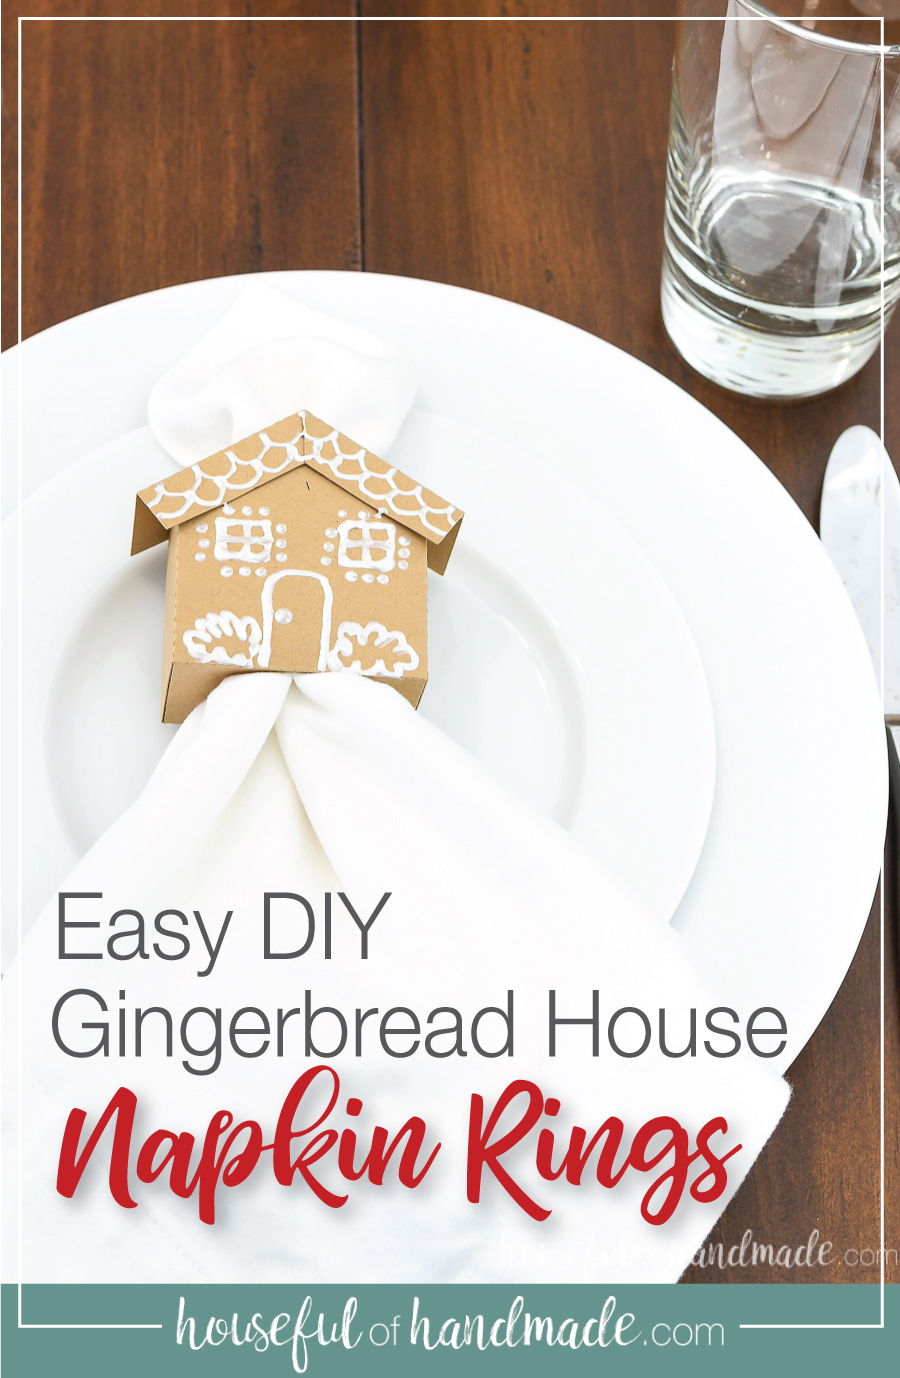 Picture of table setting with gingerbread house napkin ring on the plate and text overlay: Easy DIY gingerbread house napkin rings. 